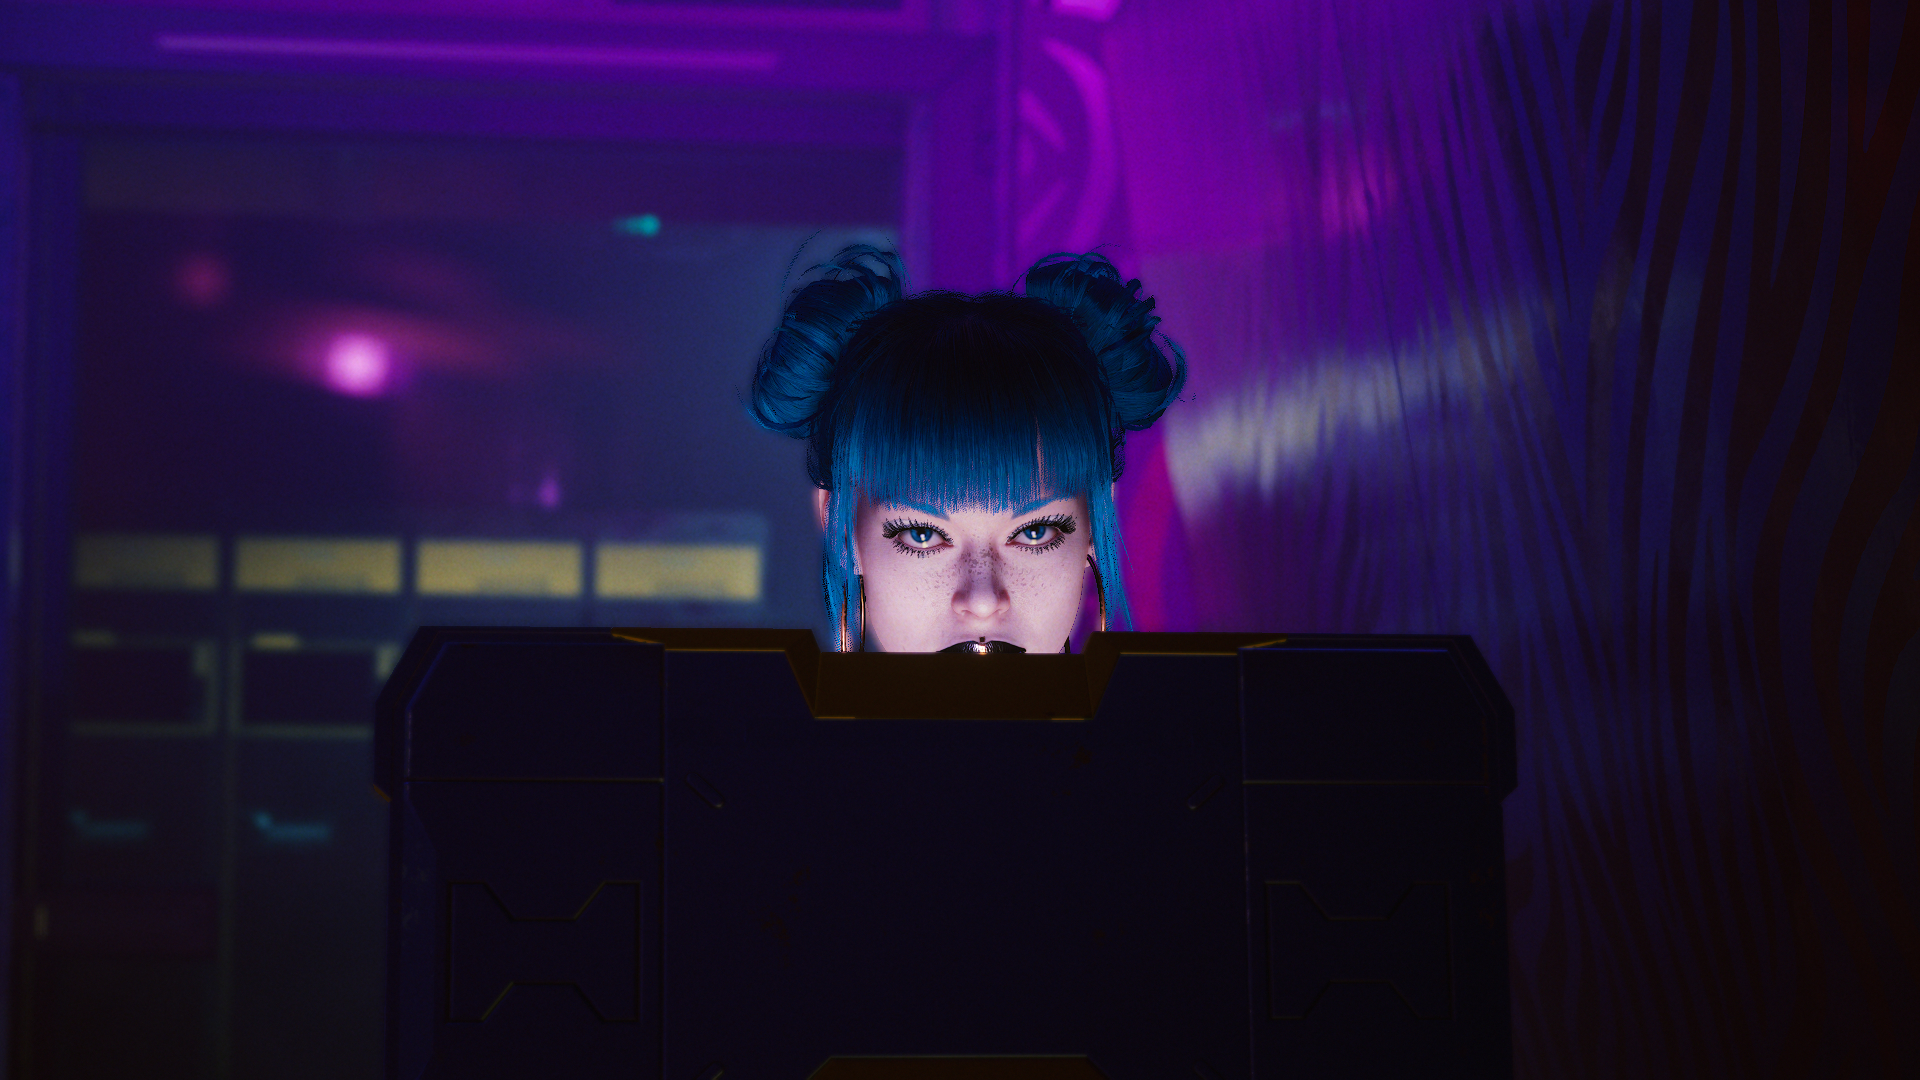 5. The top cyberpunk hairstyles featuring blue hair - wide 2